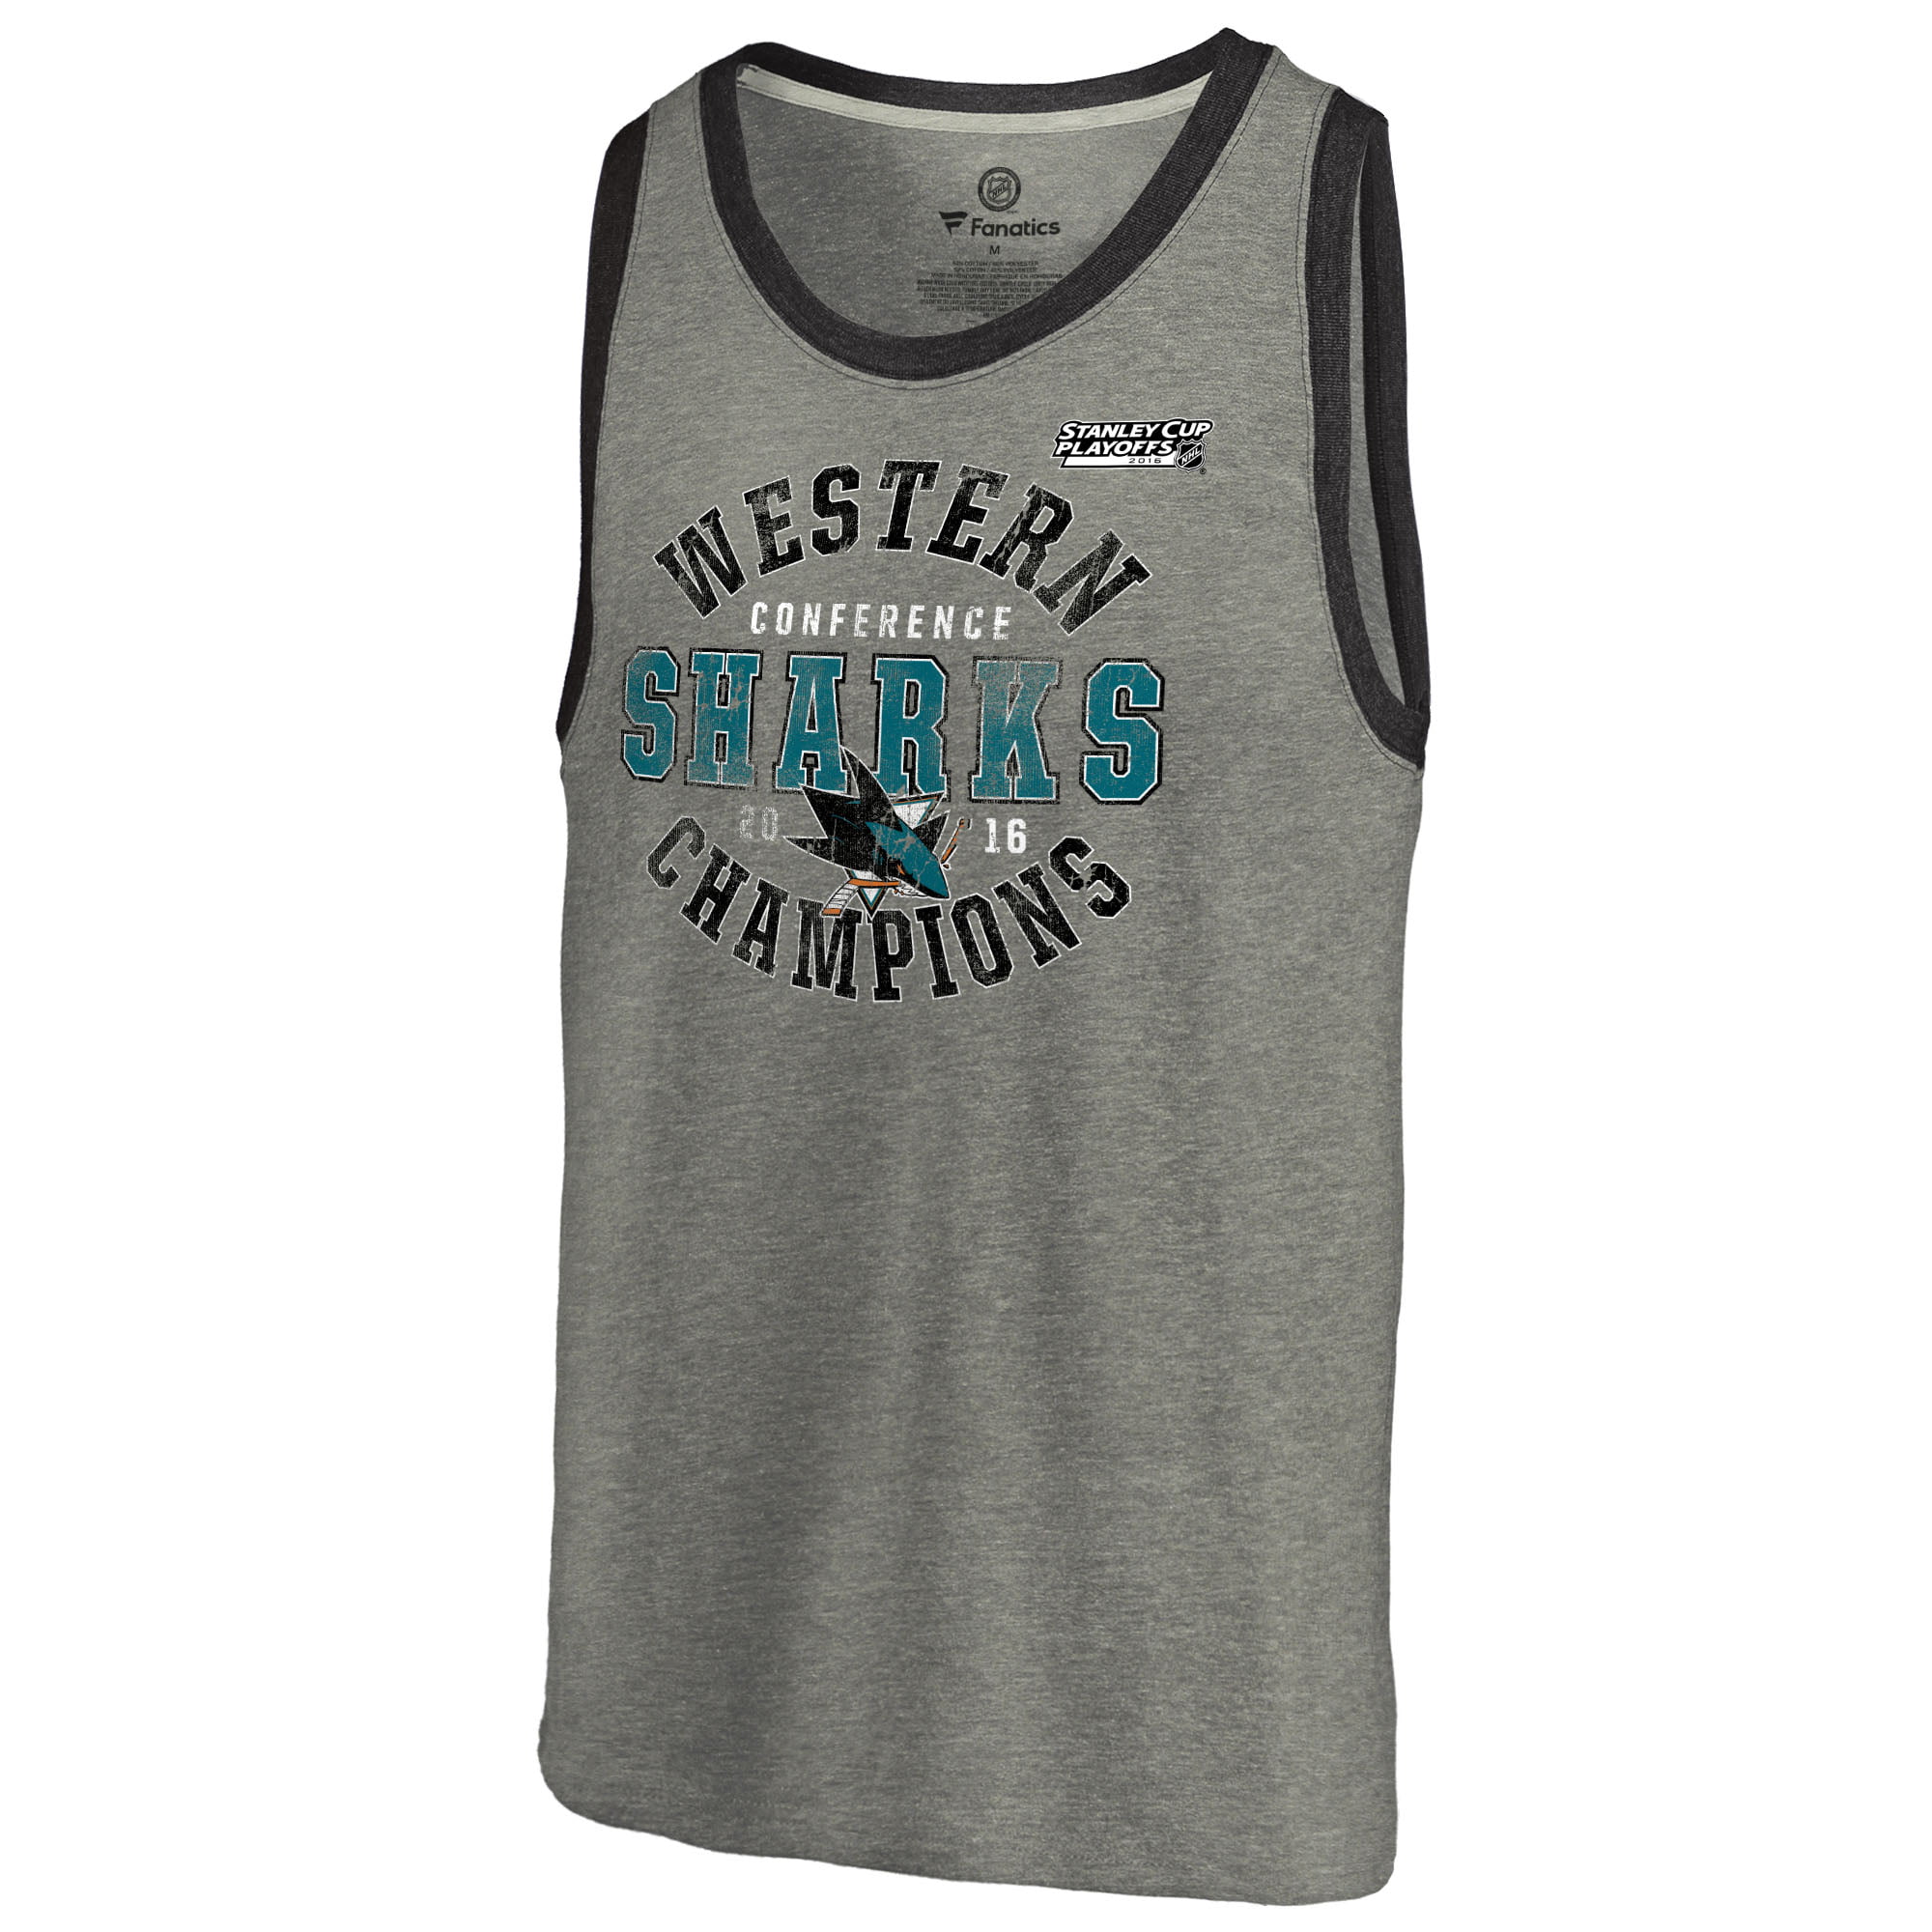 sharks western conference champions shirt